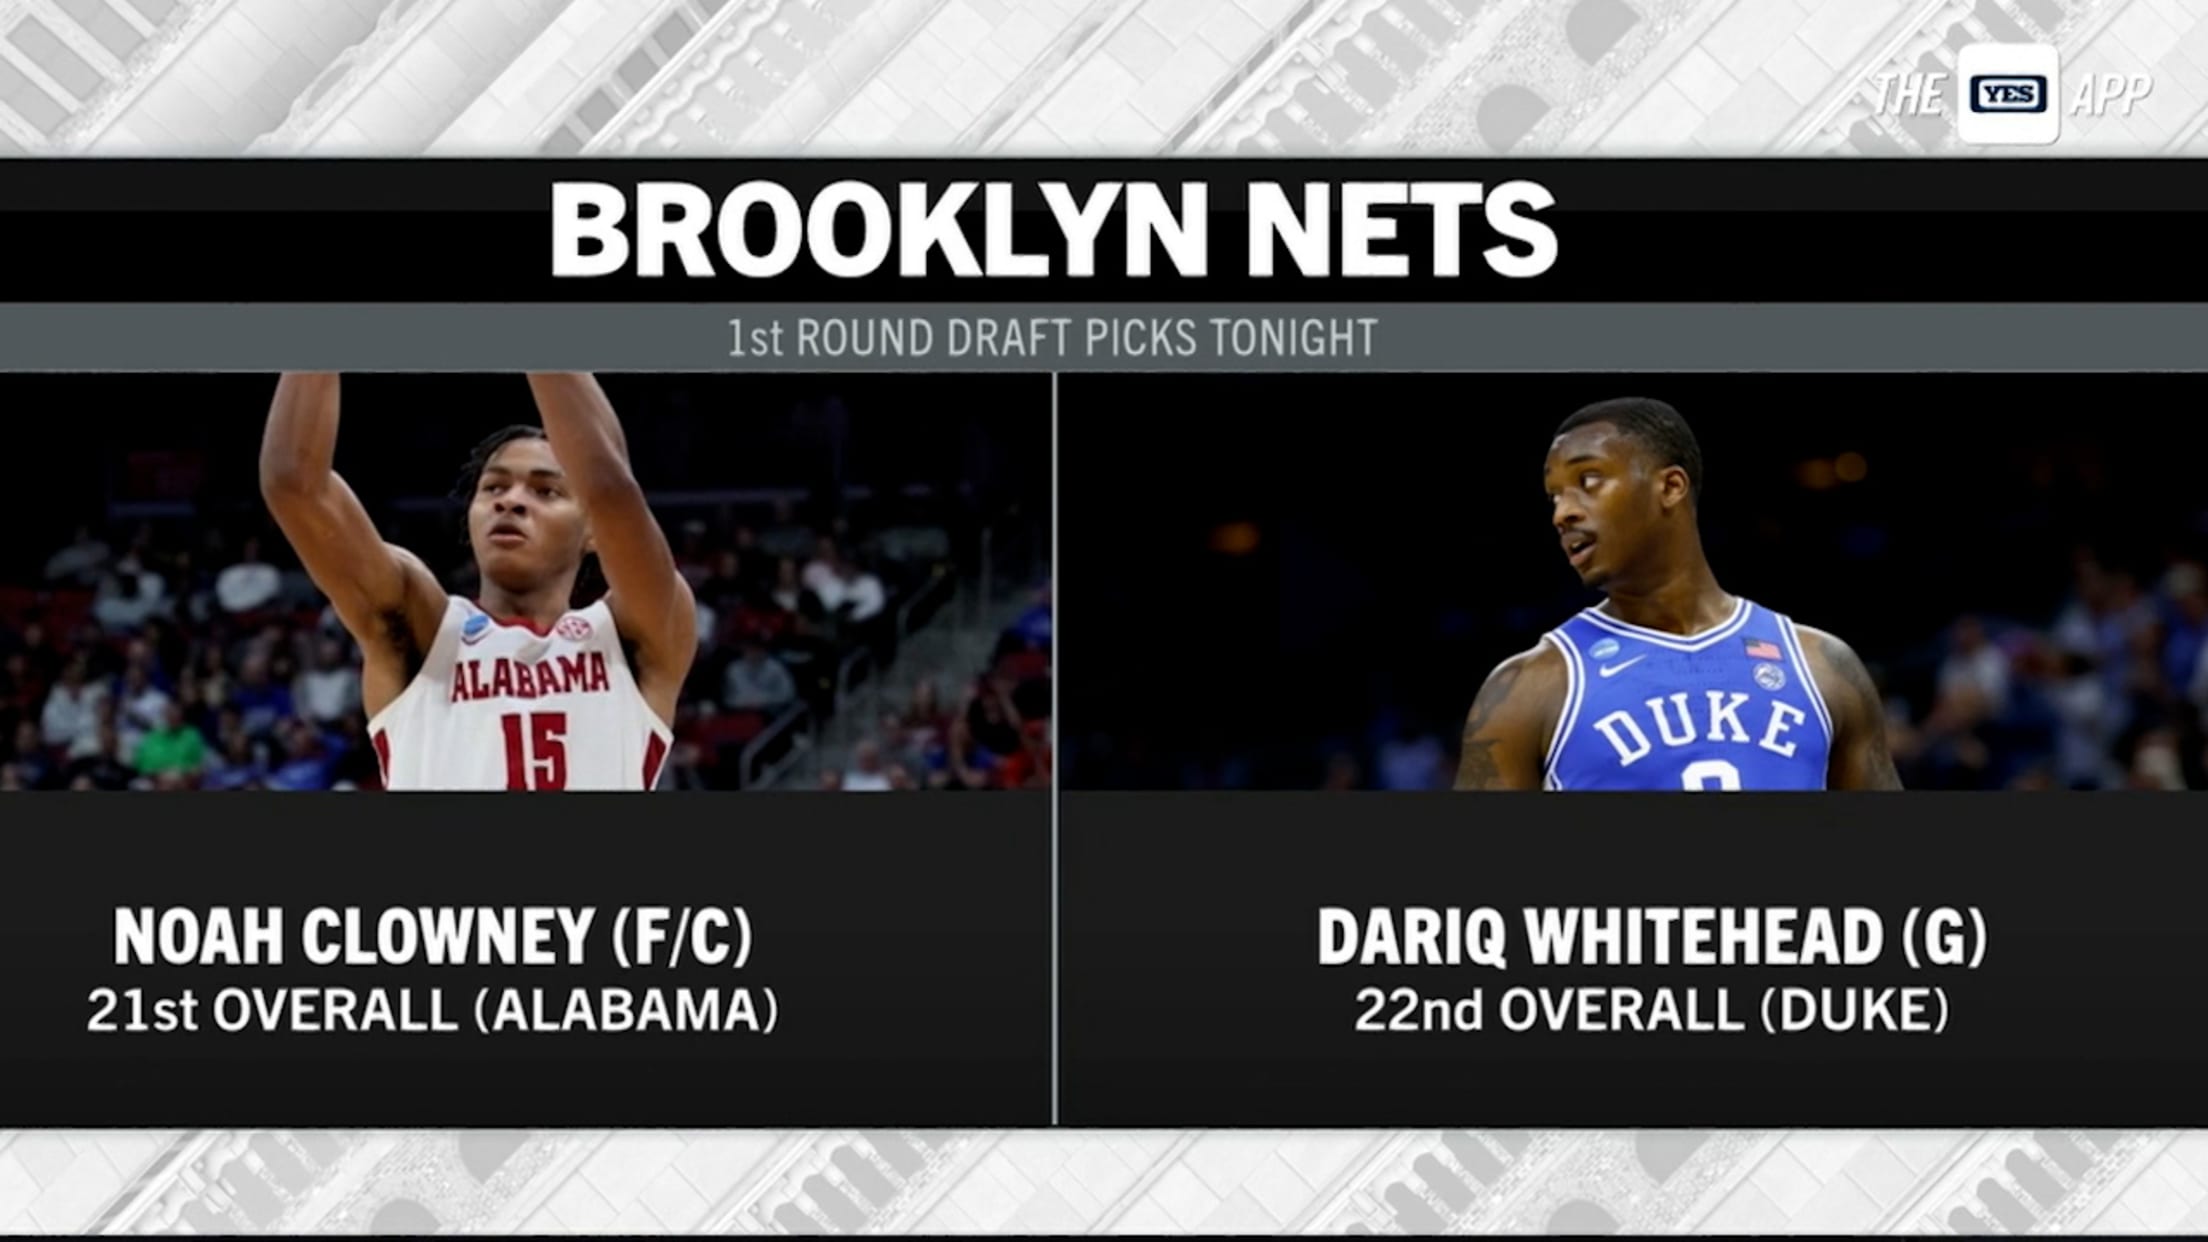 Nets YES Network